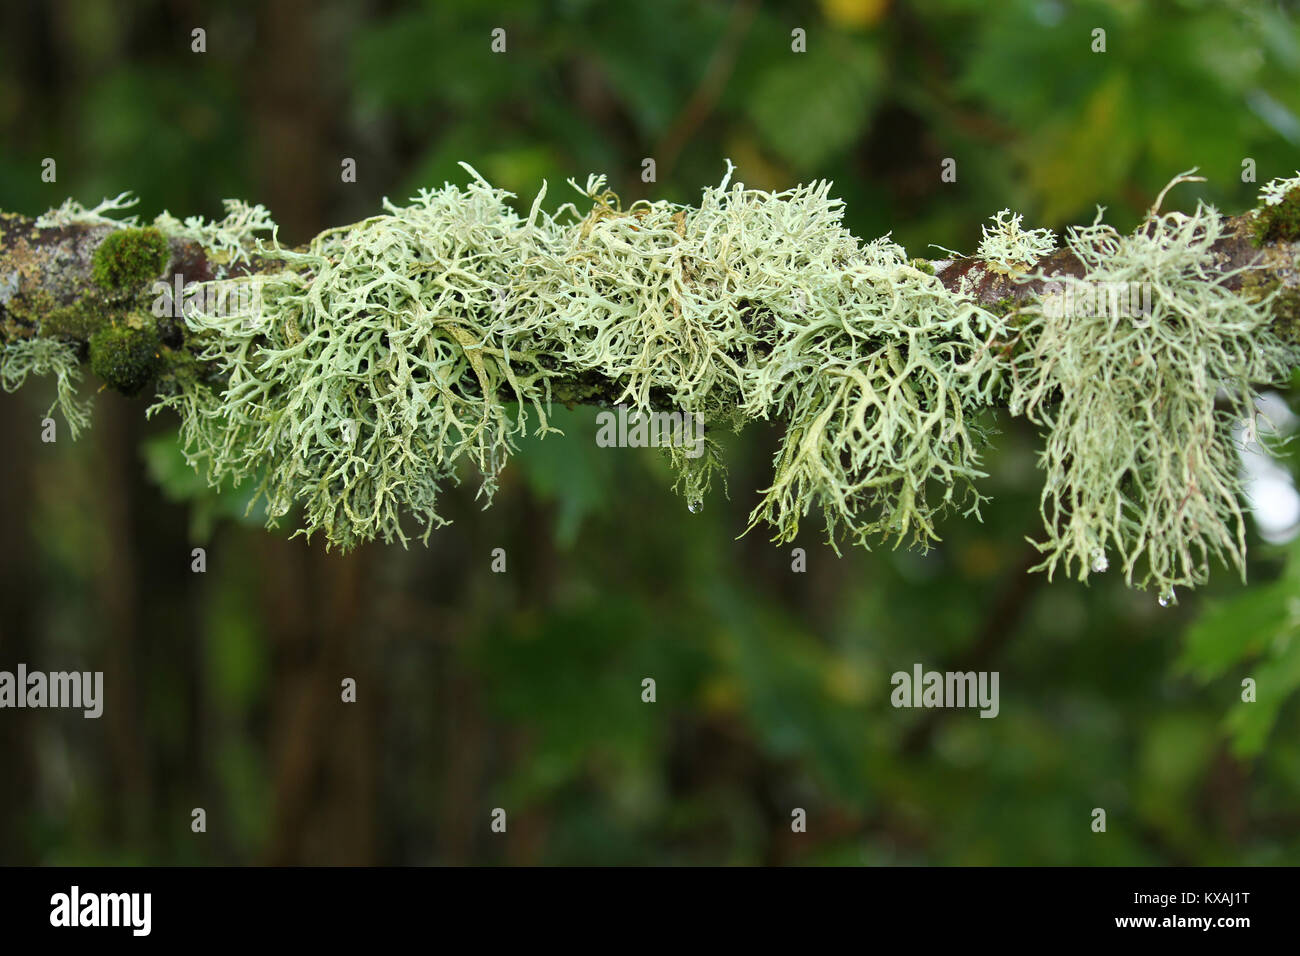 Iceland moss (Cetraria islandica) at the branch, Southern Sweden, Sweden Stock Photo